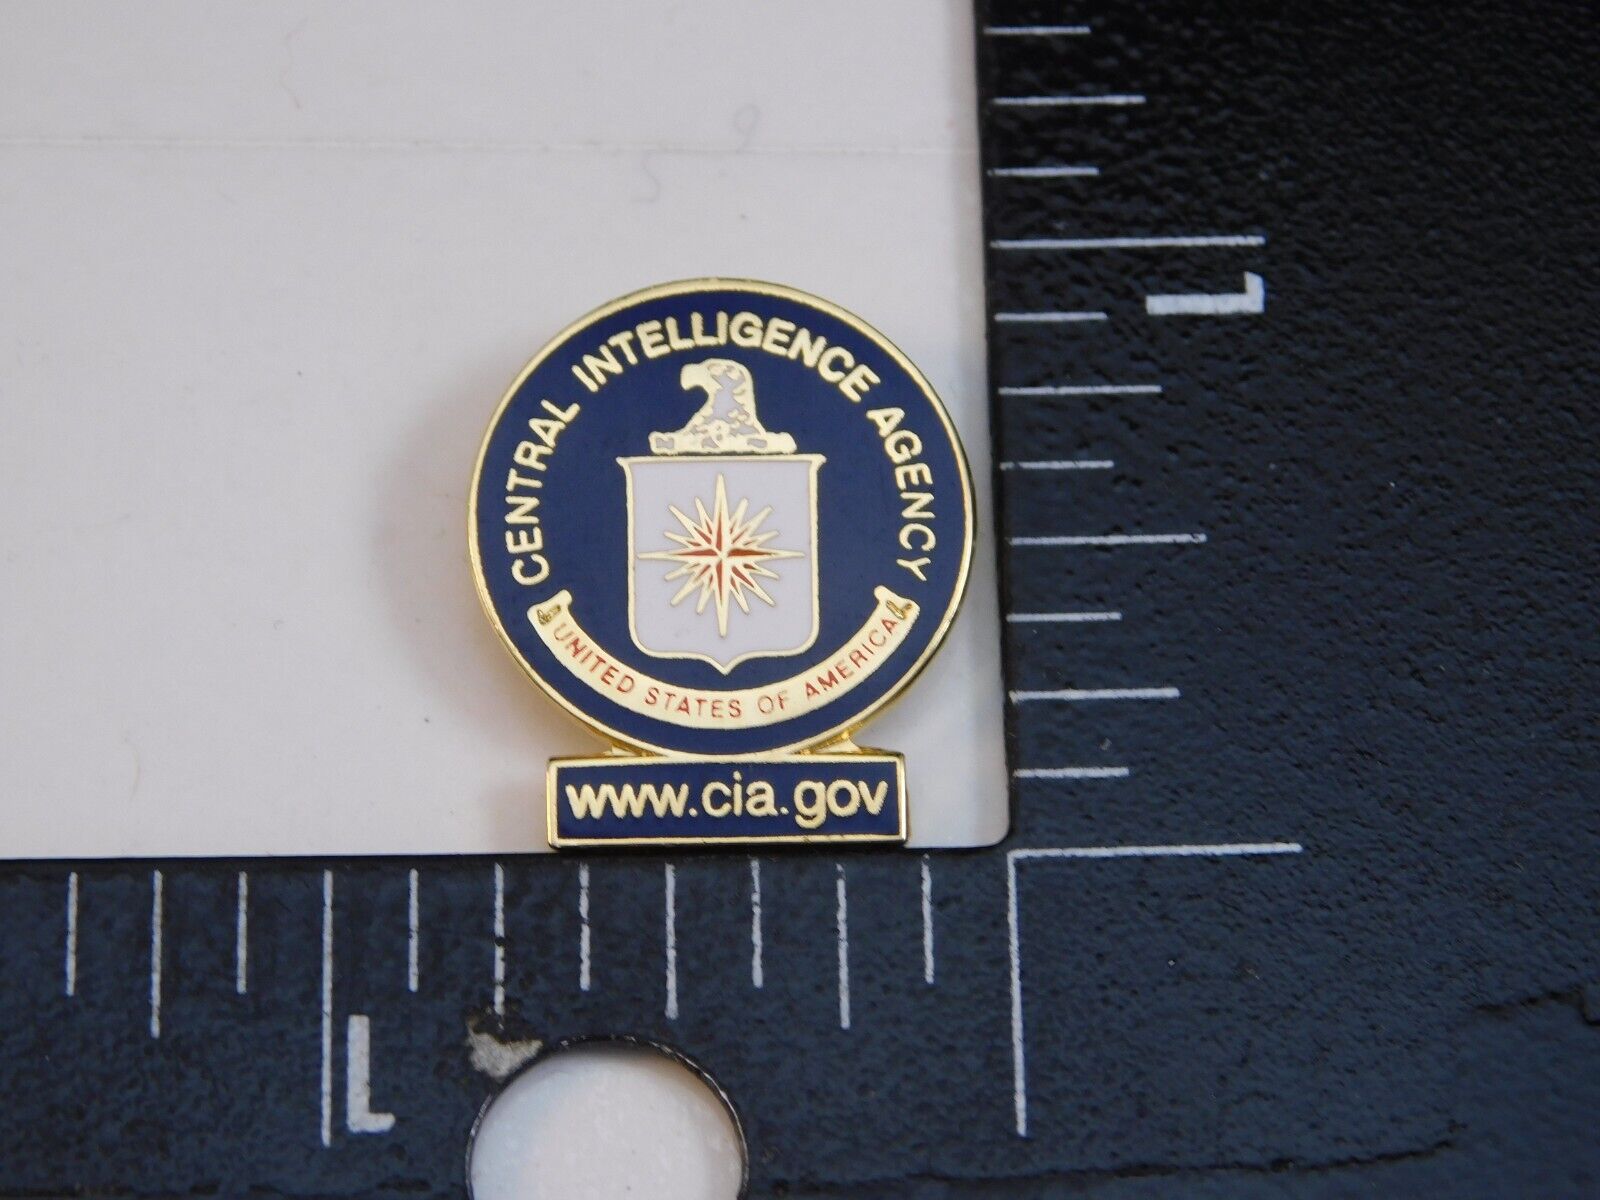 C.I.A. CENTRAL INTELLIGENCE AGENCY CIA UNITED STATES OF AMERICA PIN